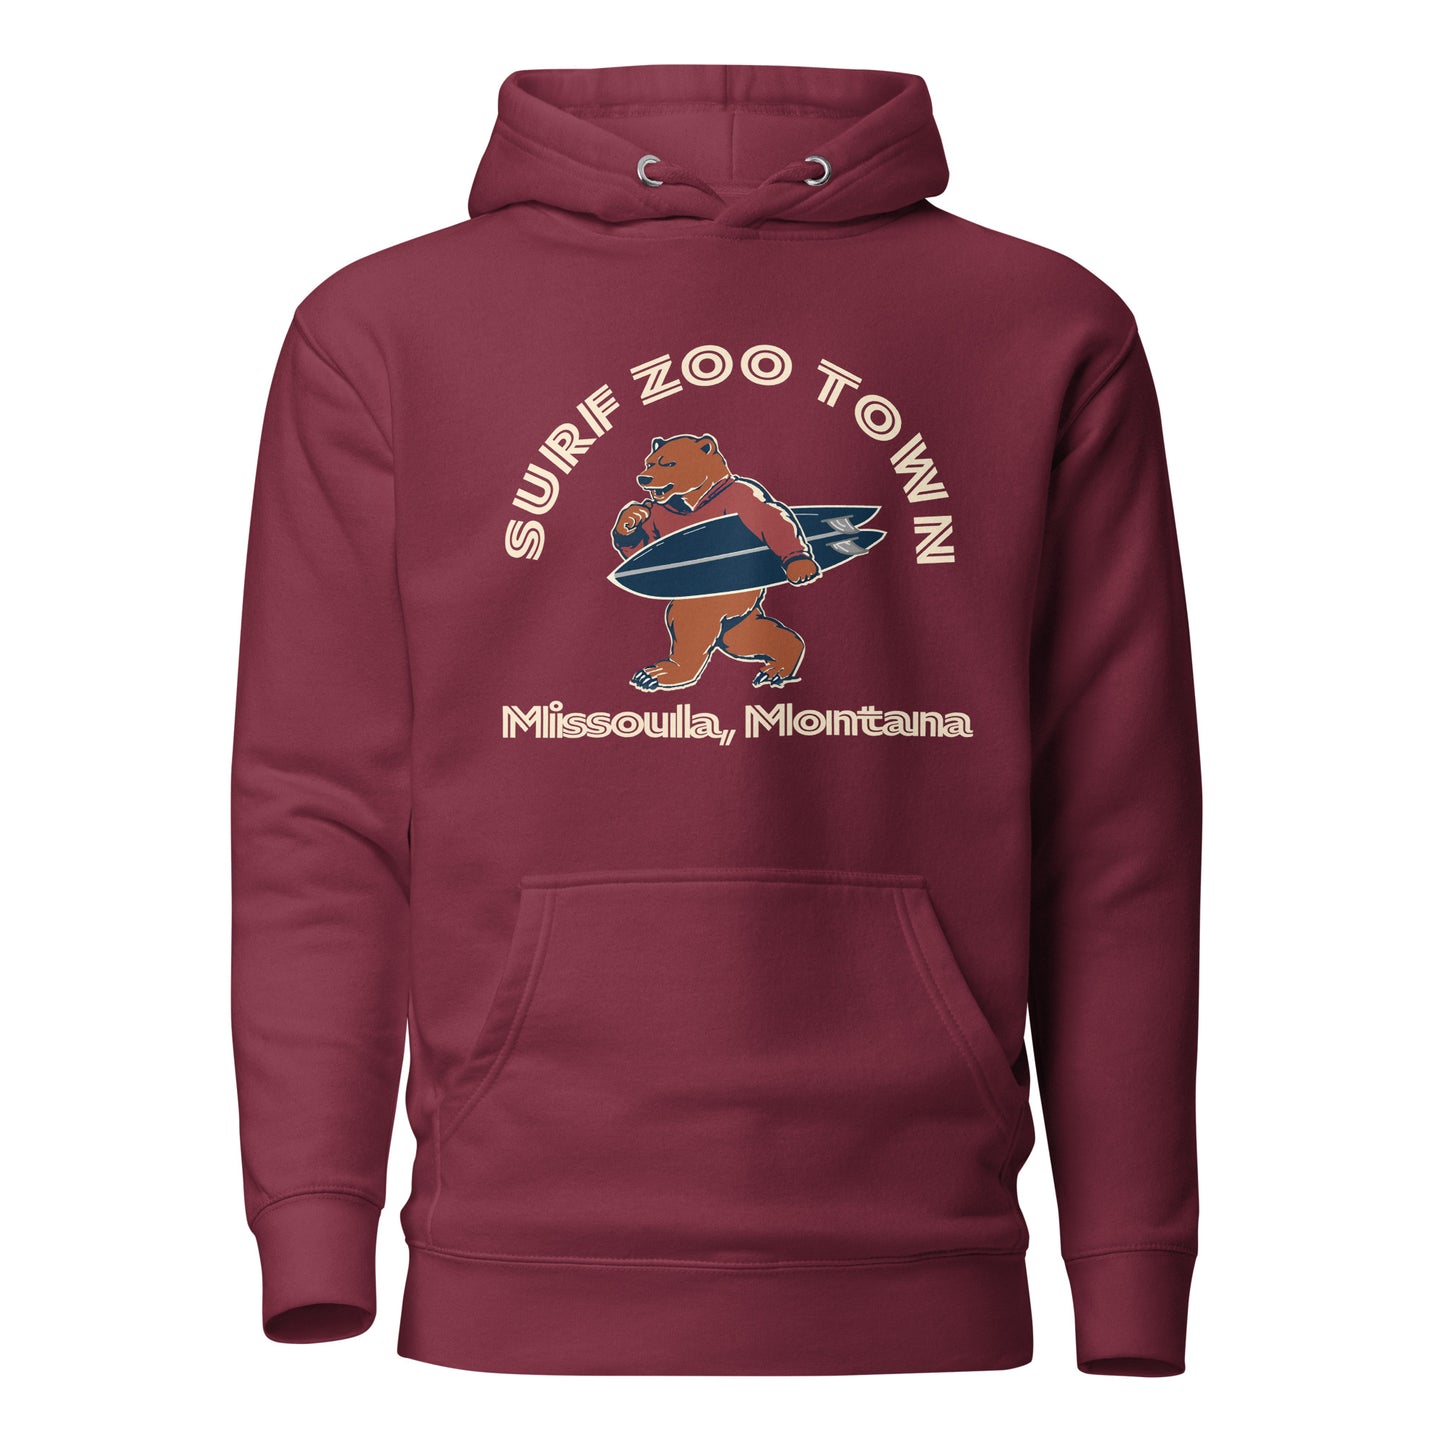 SURF ZOO TOWN - GRIZZLY BEAR - Unisex Hoodie